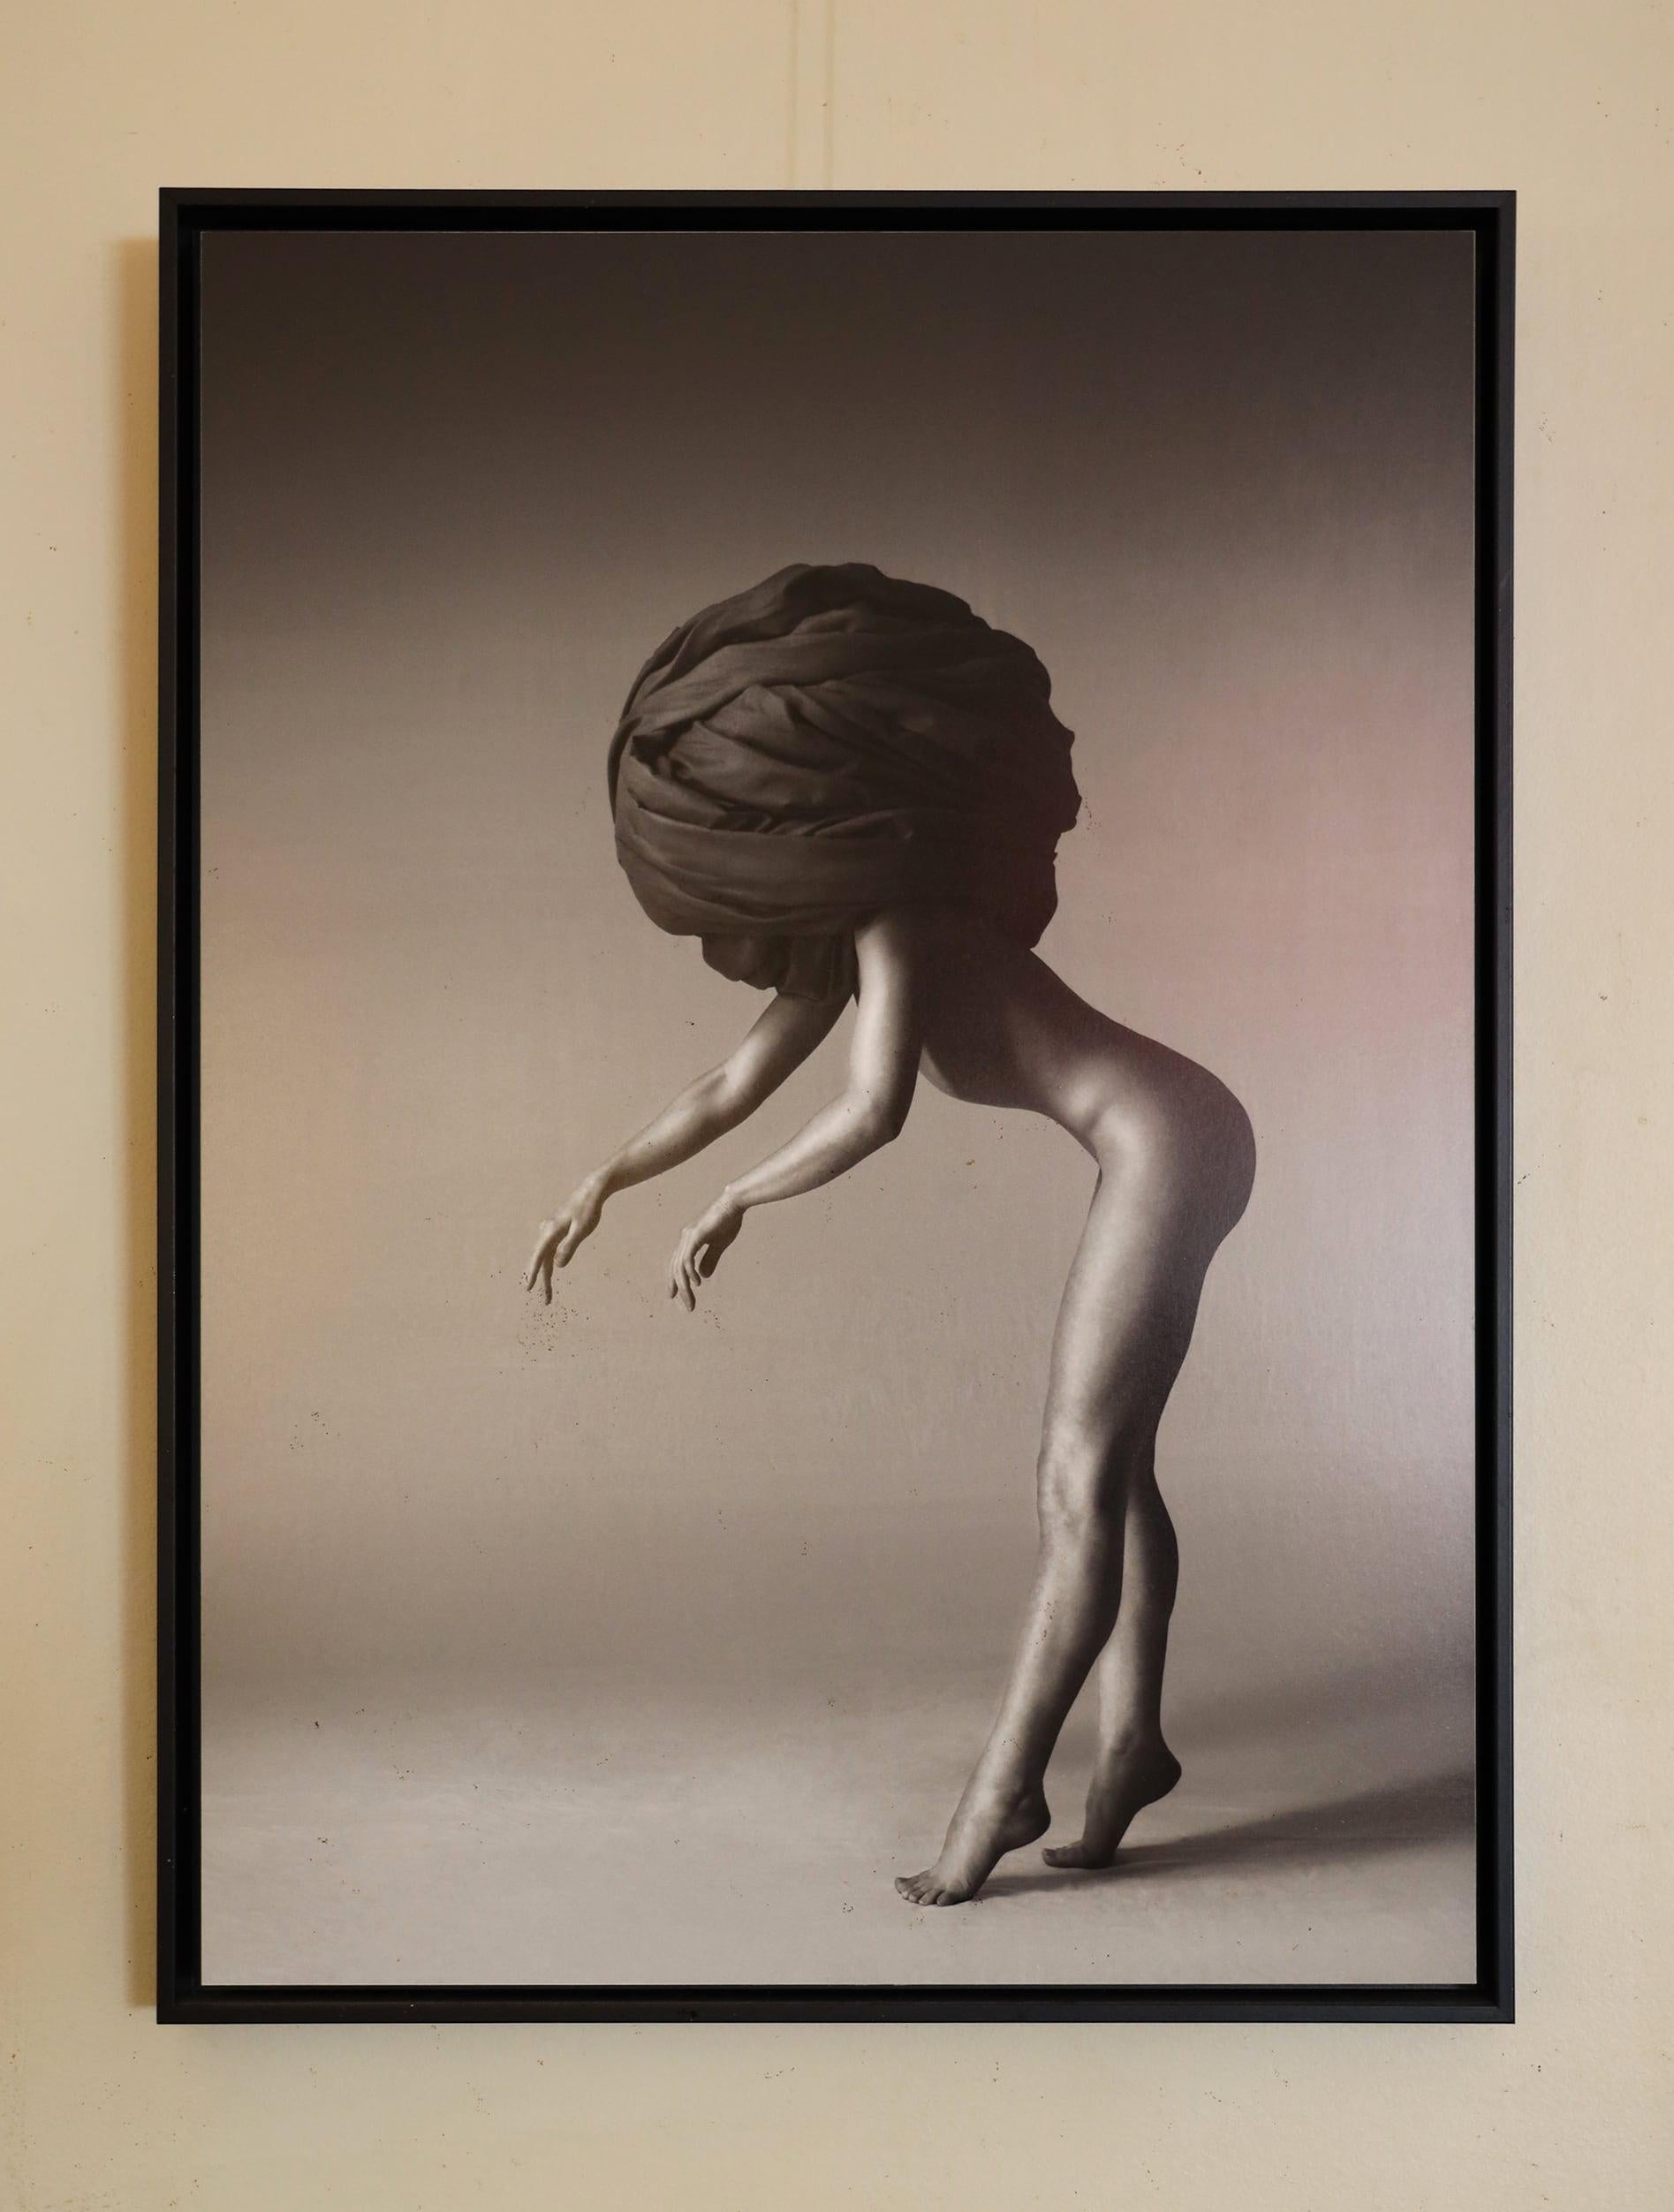 168.07.12, Wrapped series by Klaus Kampert - black and White nude photography 1